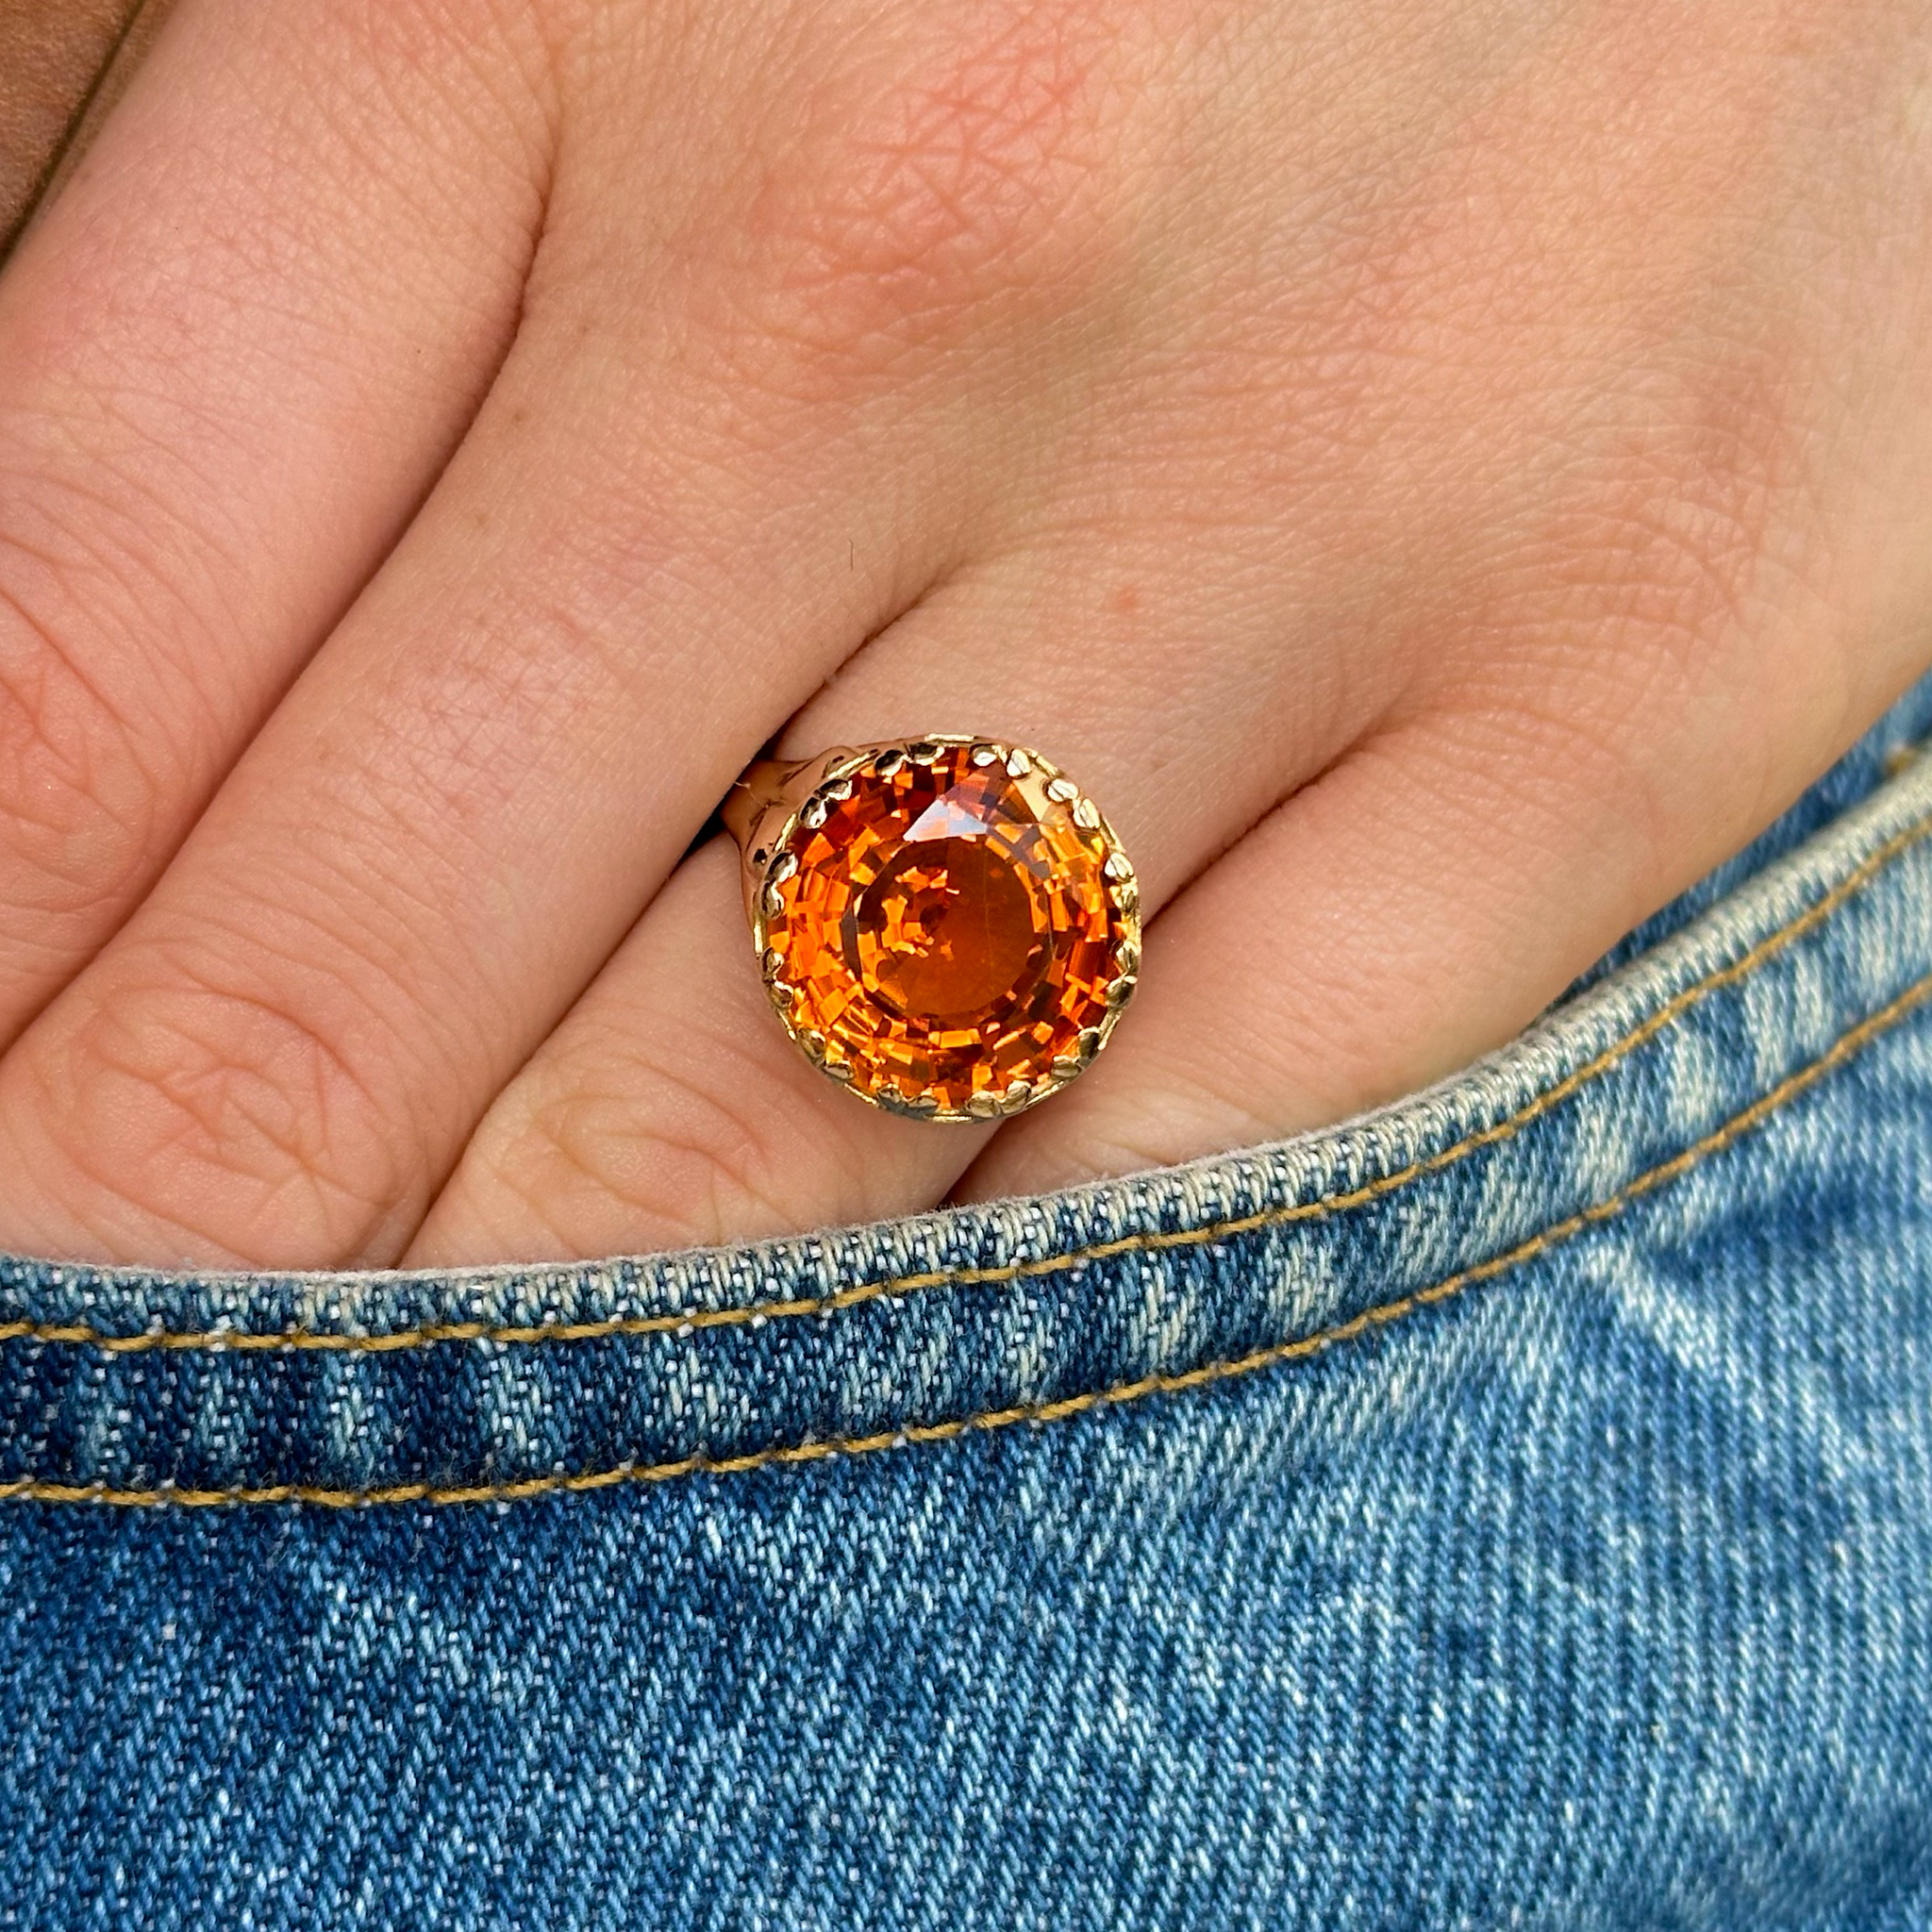 Vintage, 1980s Citrine Cocktail Ring, 18ct Yellow Gold worn on hand in pocket of jeans